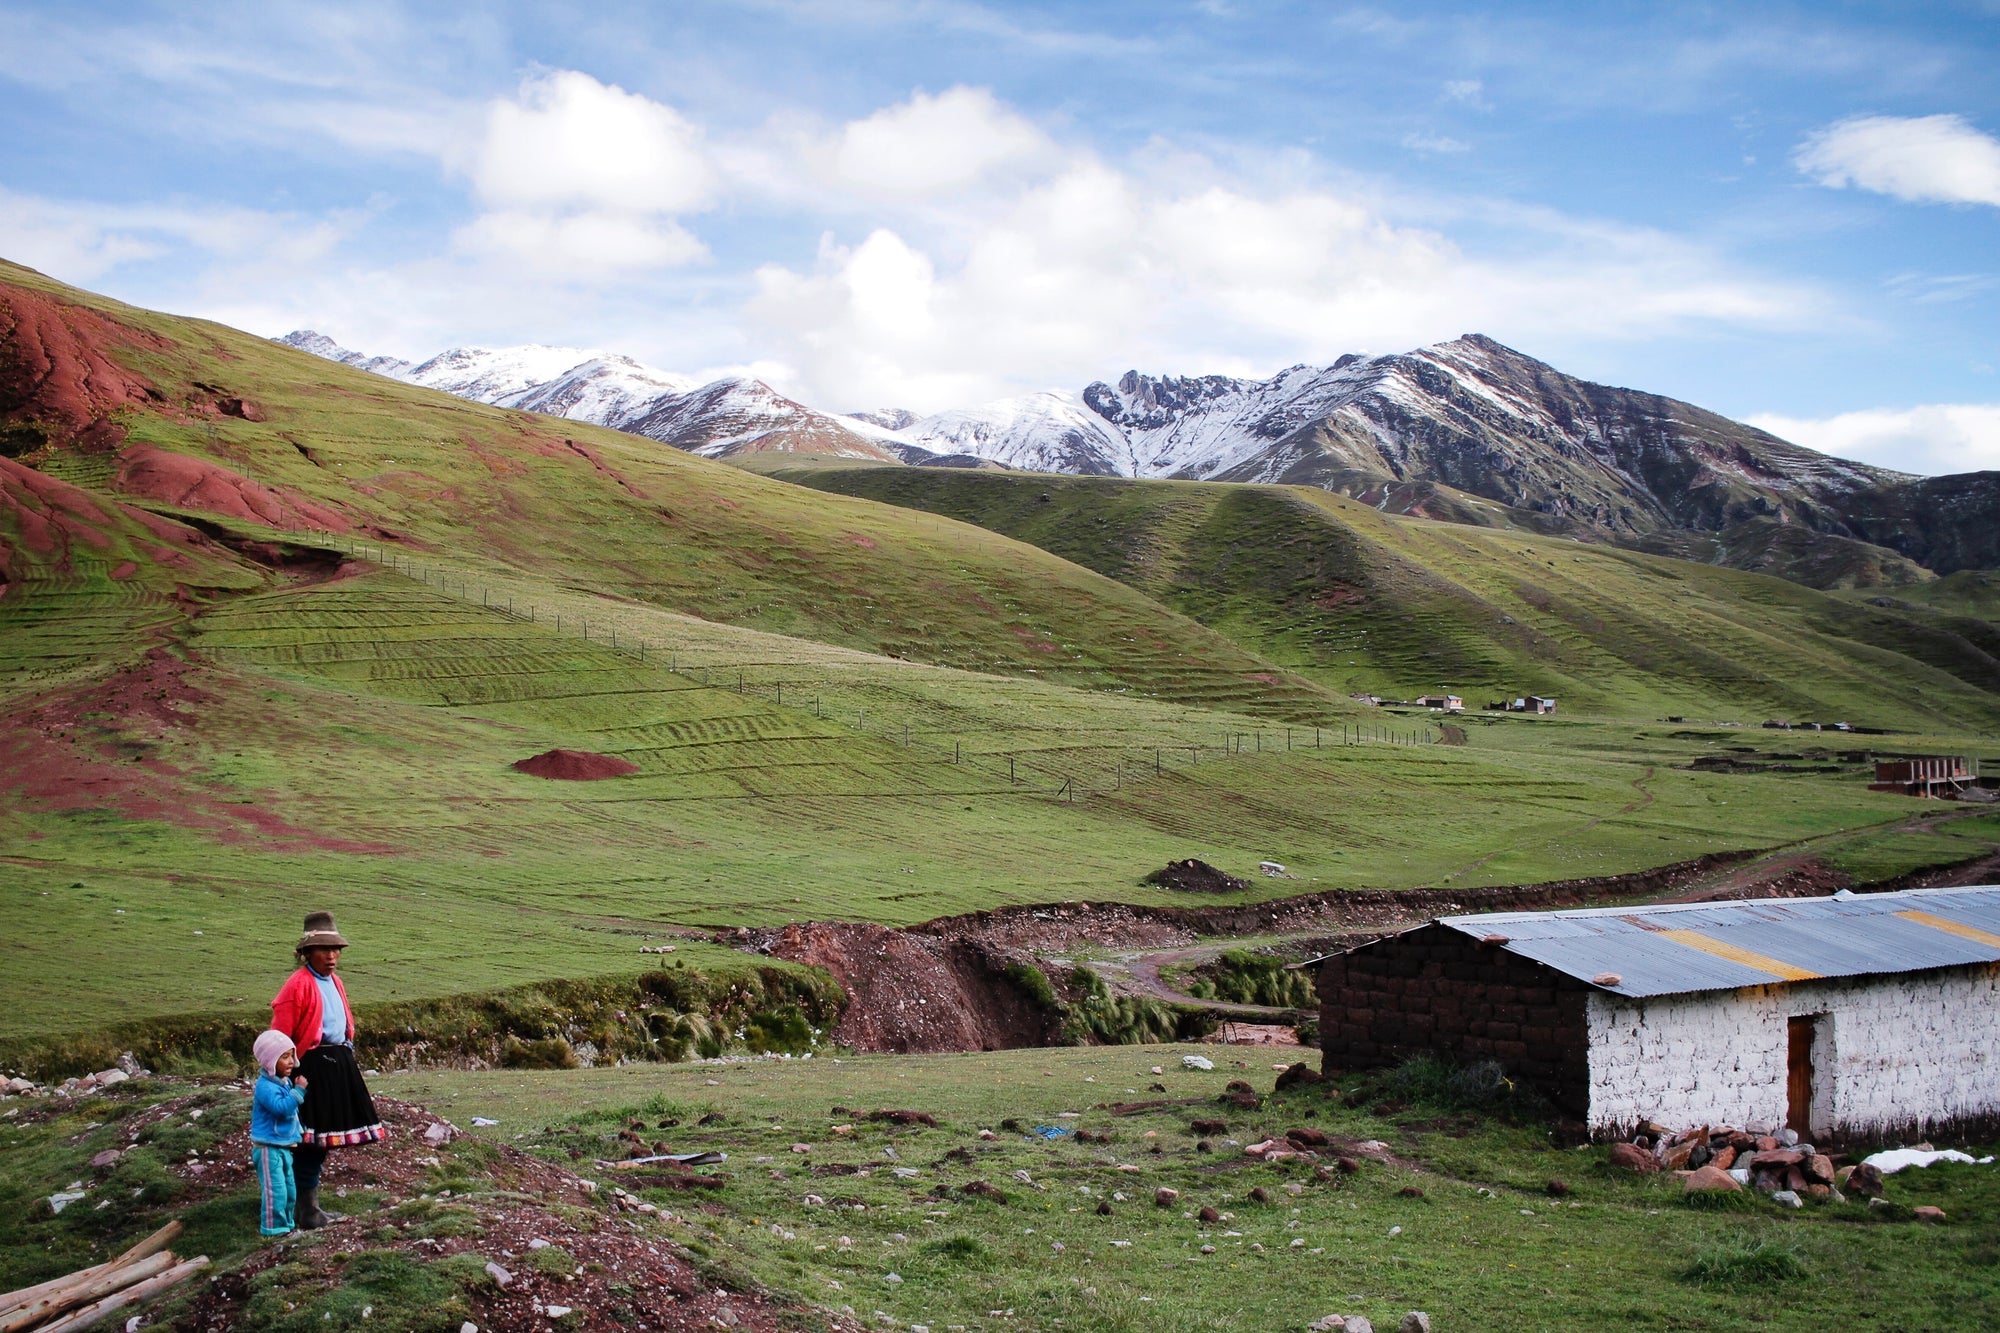 a picutre of a women and child by their house in the andes overlooking a mountain with snow on top